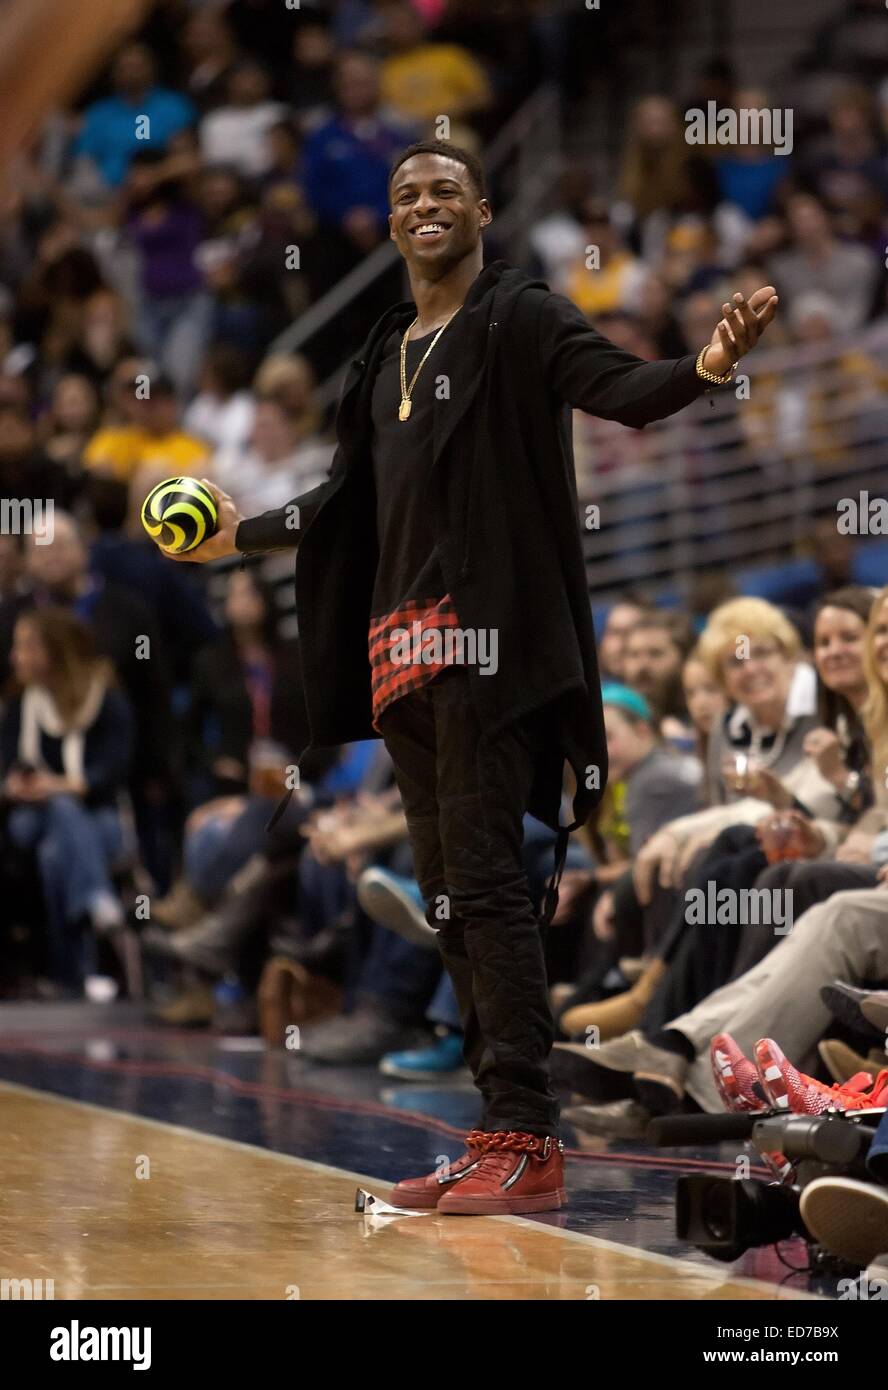 Denver, Colorado, USA. 30th Dec, 2014. Denver Broncos WR EMMANUEL SANDERS readies to throw a pass to Nuggets Mascot ROCKY during a break the 3rd. Quarter at the Pepsi Center Tues. night. The Lakers beat the Nuggets 111-103 Credit:  Hector Acevedo/ZUMA Wire/Alamy Live News Stock Photo